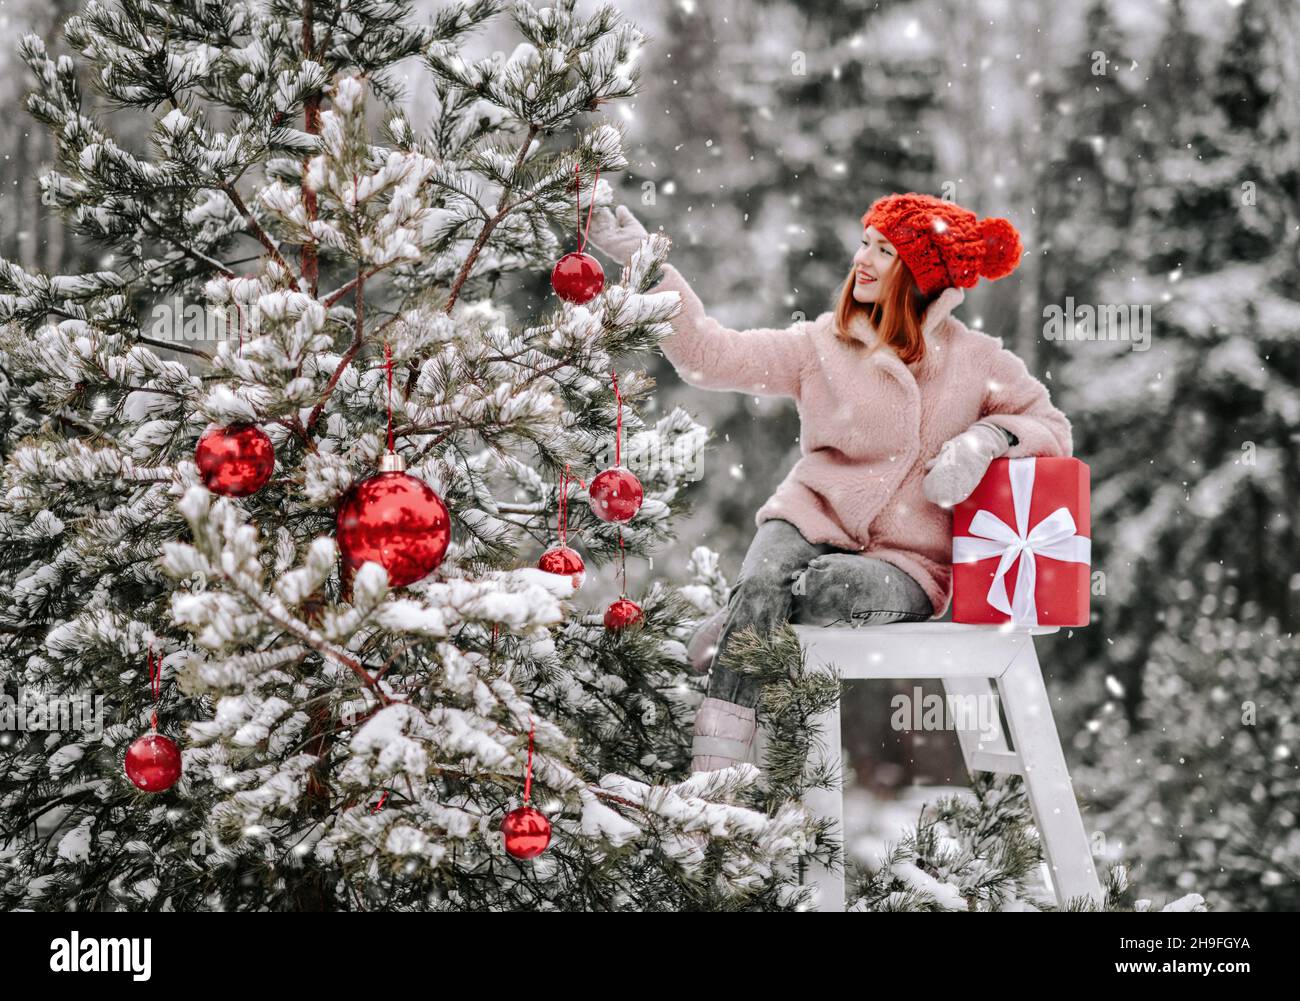 Young smiling pretty woman in stylish warm clothing sitting with giftbox on stepladder near decorated Christmas outdoors Stock Photo